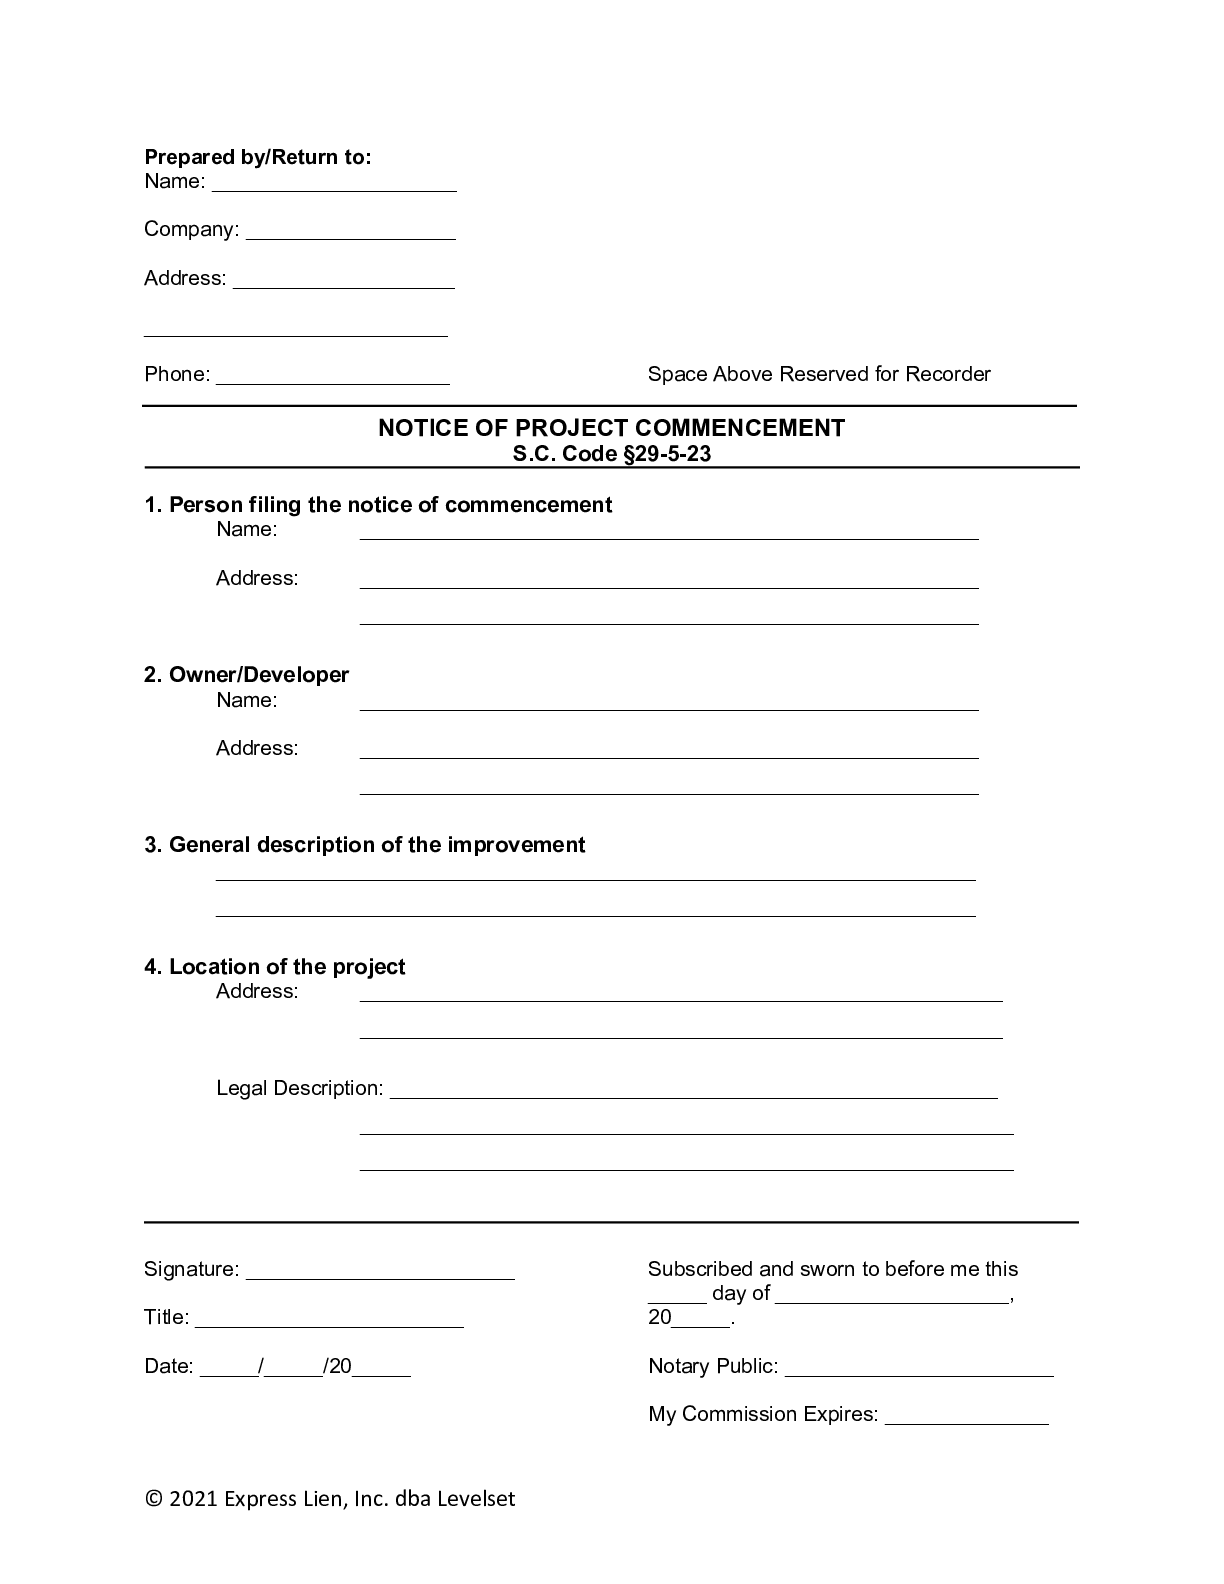 South Carolina Notice of Project Commencement Form